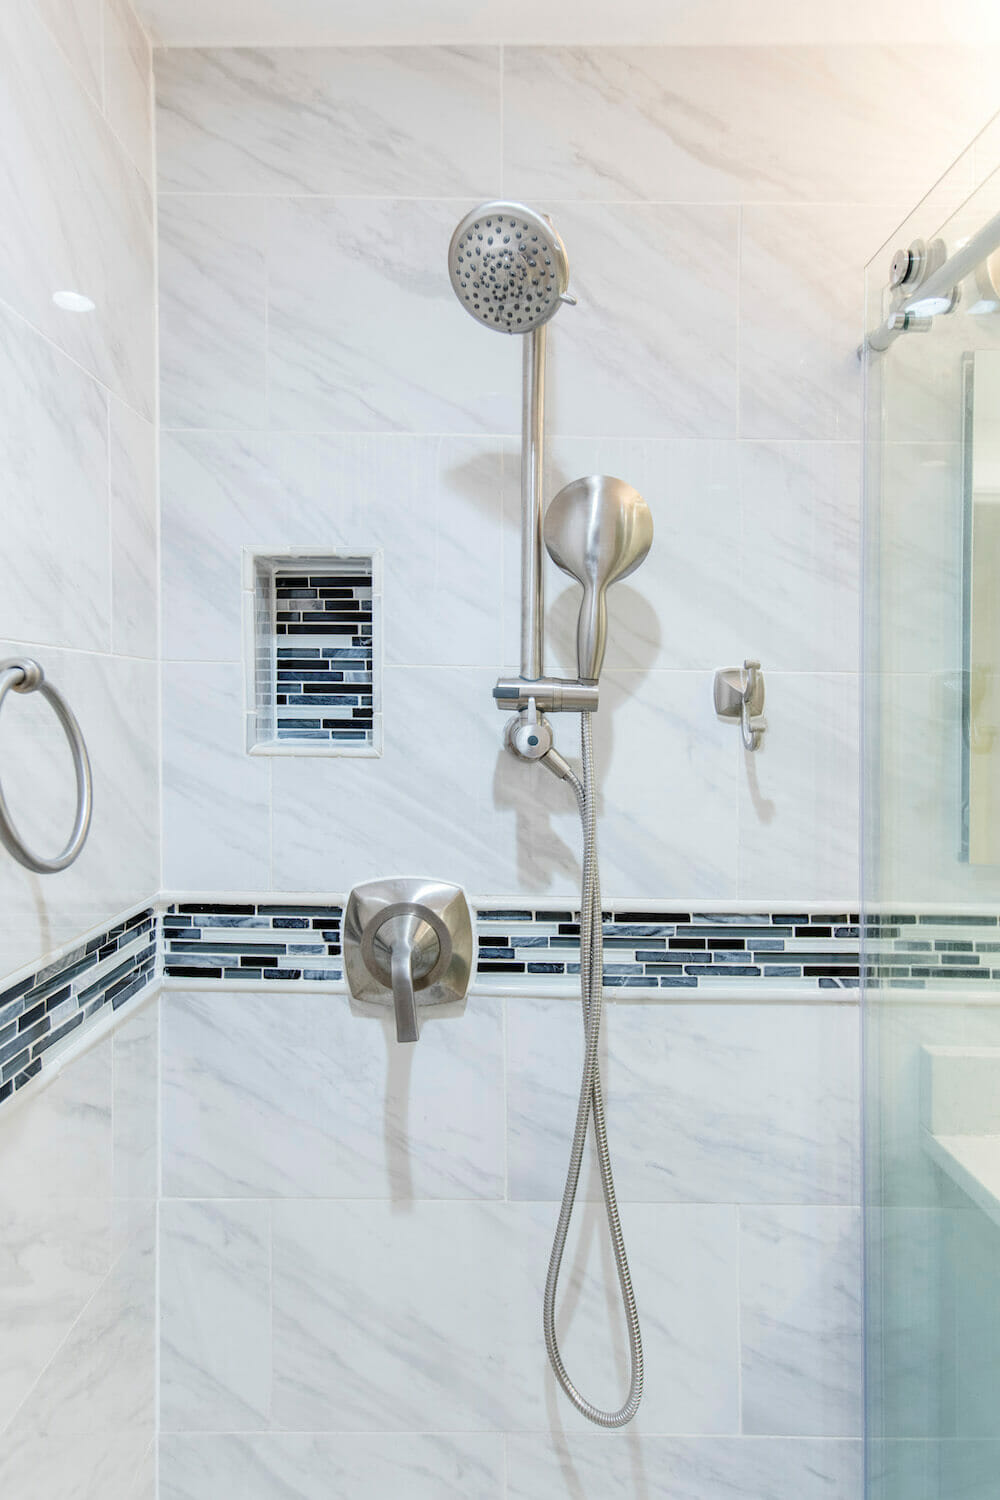 Image of a new shower with large tile, a niche and silver fixtures